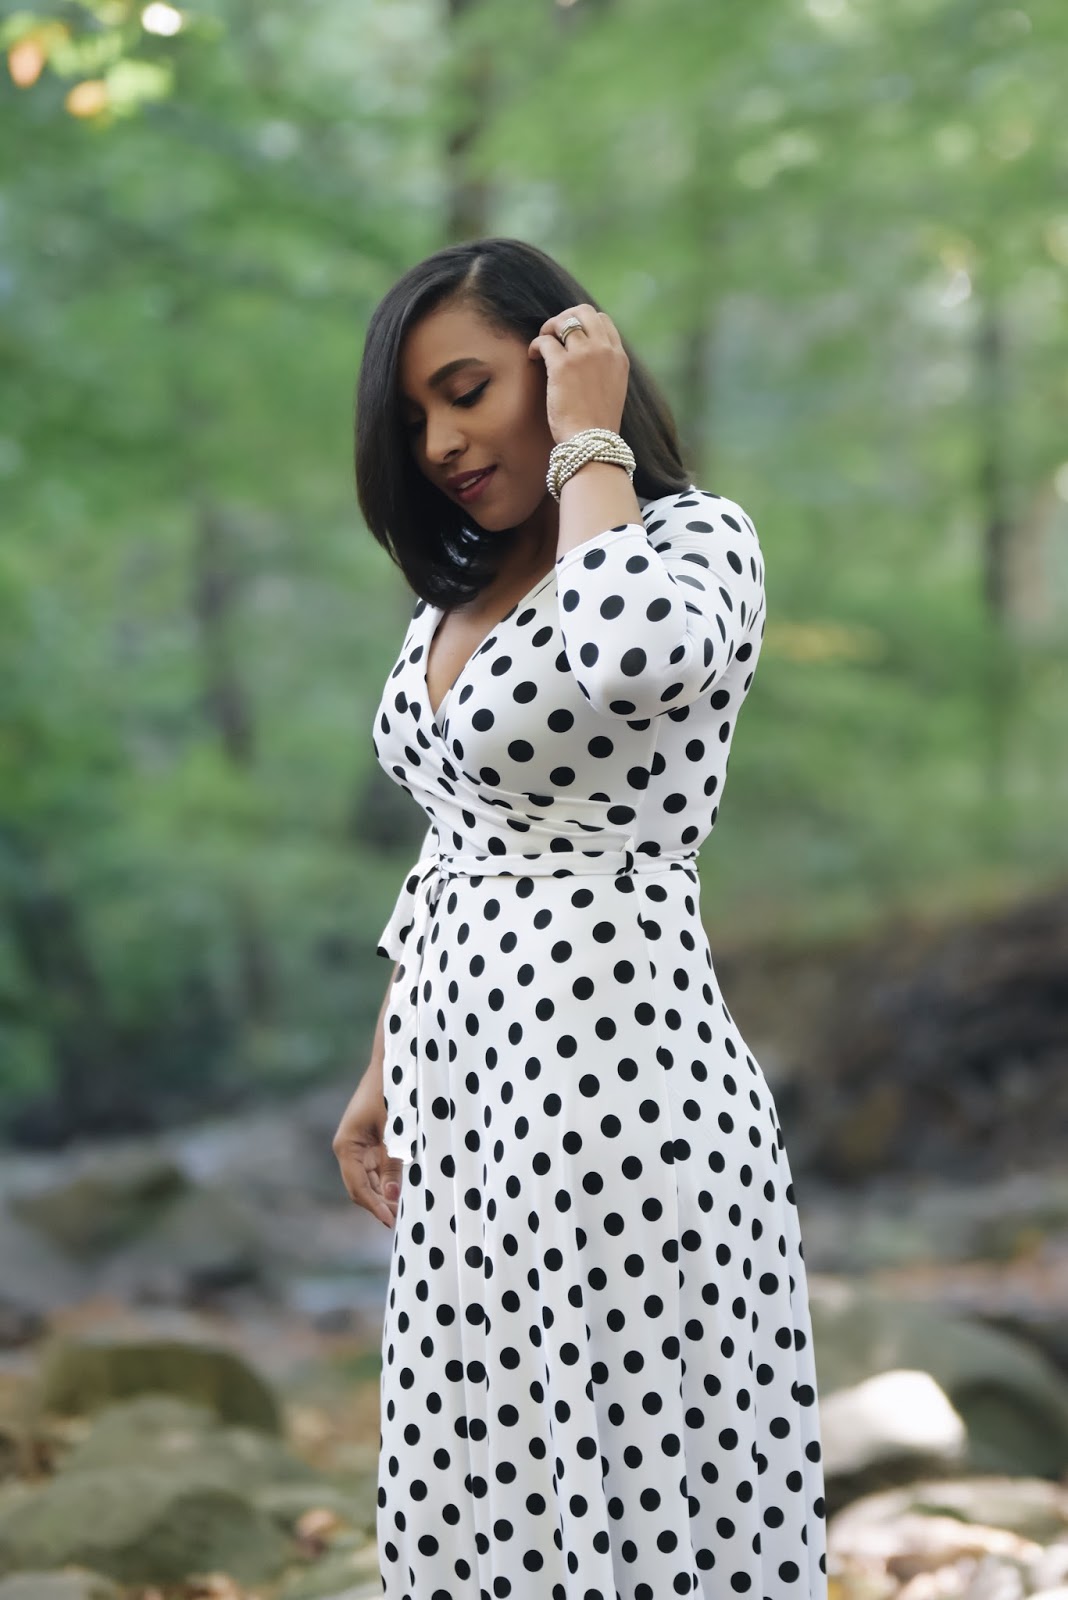 polka dot dress, woods, forest, long dresses, dress ideas for the holidays, black and white, fall outfit ideas